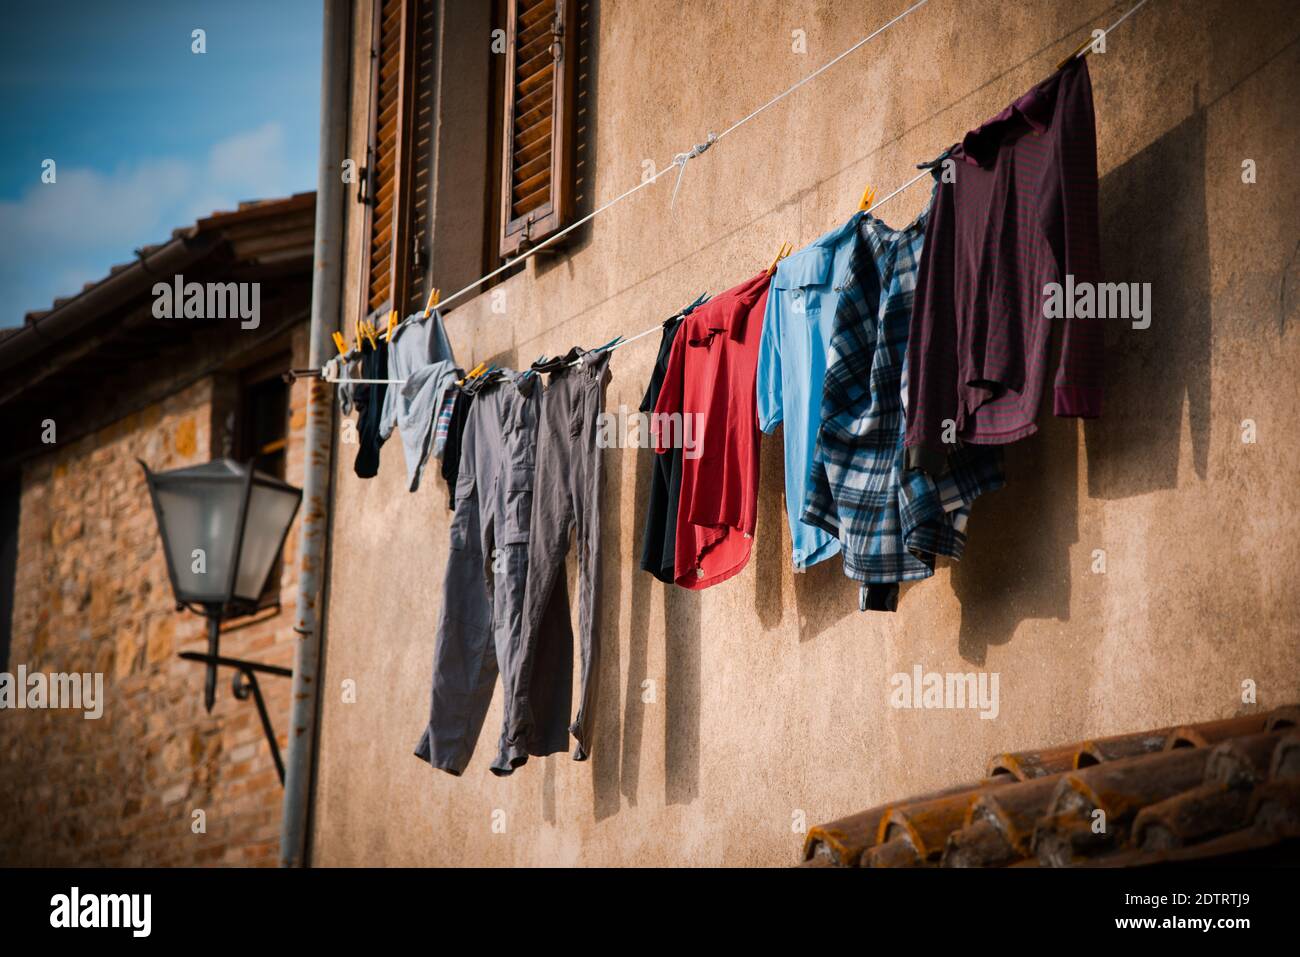 A shot of clothing hanging on the washing line to dry on a sunny dya Stock Photo